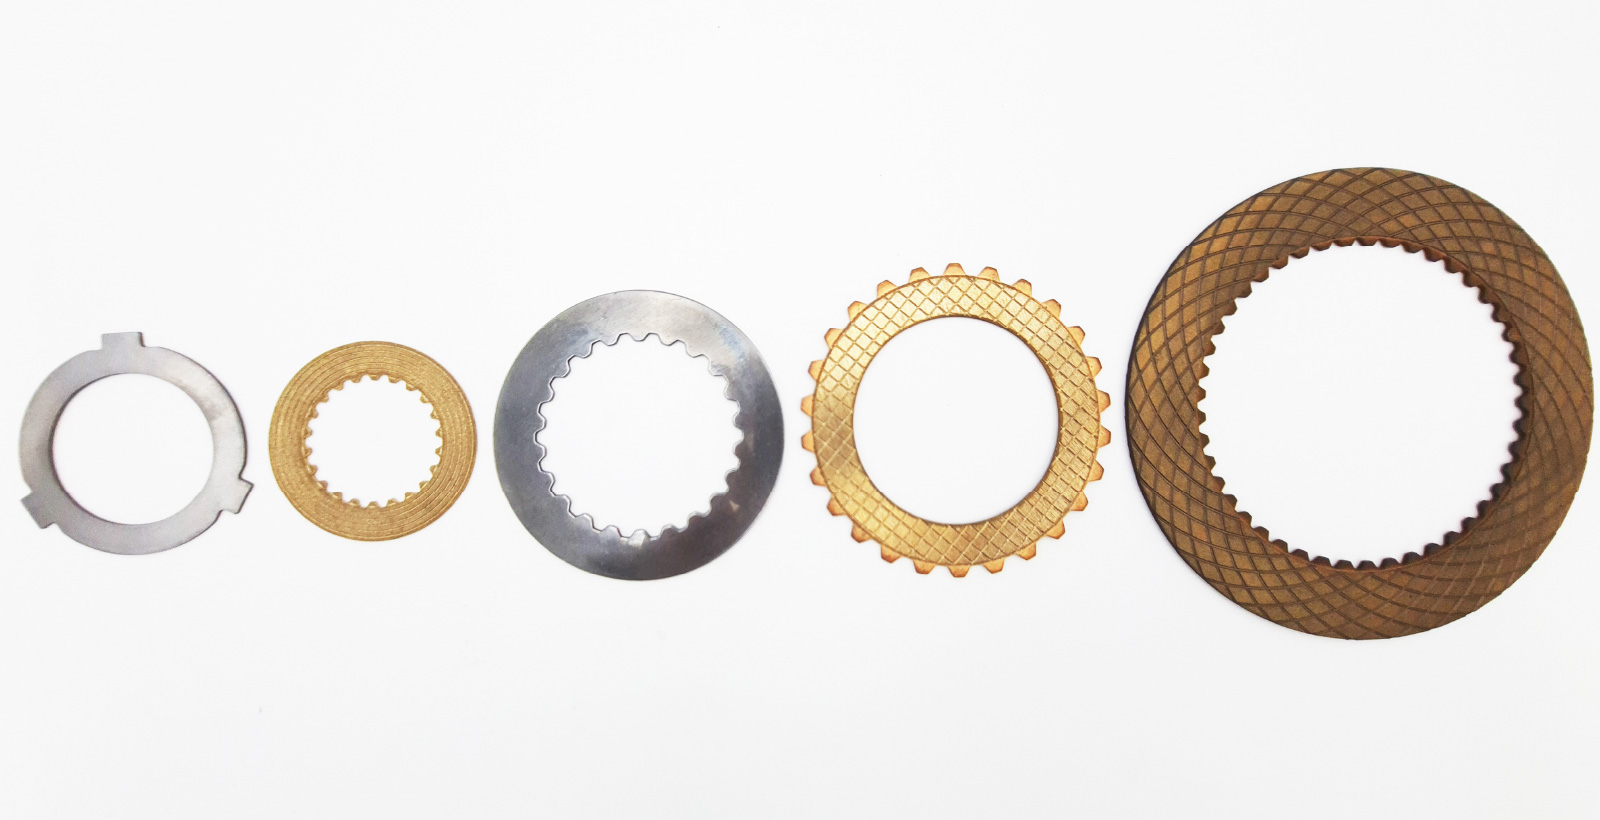 Carbon Transmission Discs for Paper and Pulp Industry